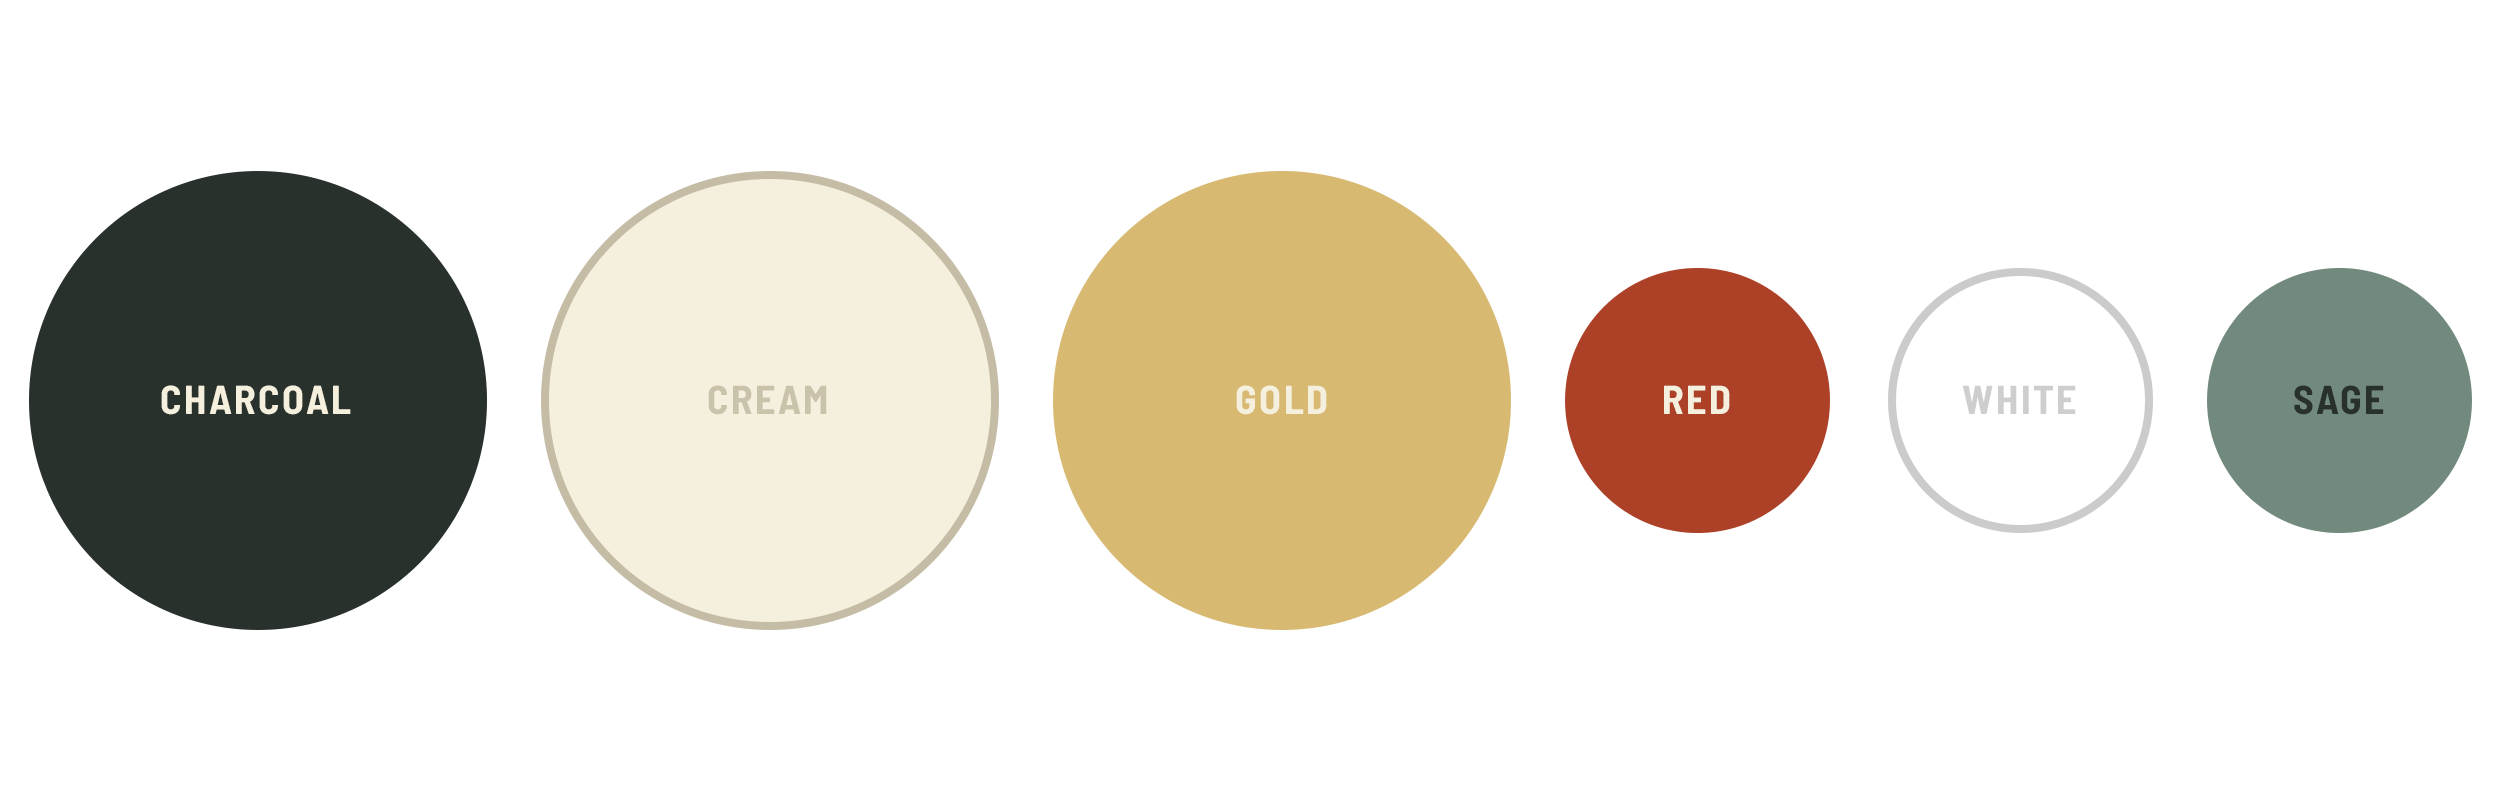 brand color palette for Oxbow including charcoal, cream, gold, red, white, sage